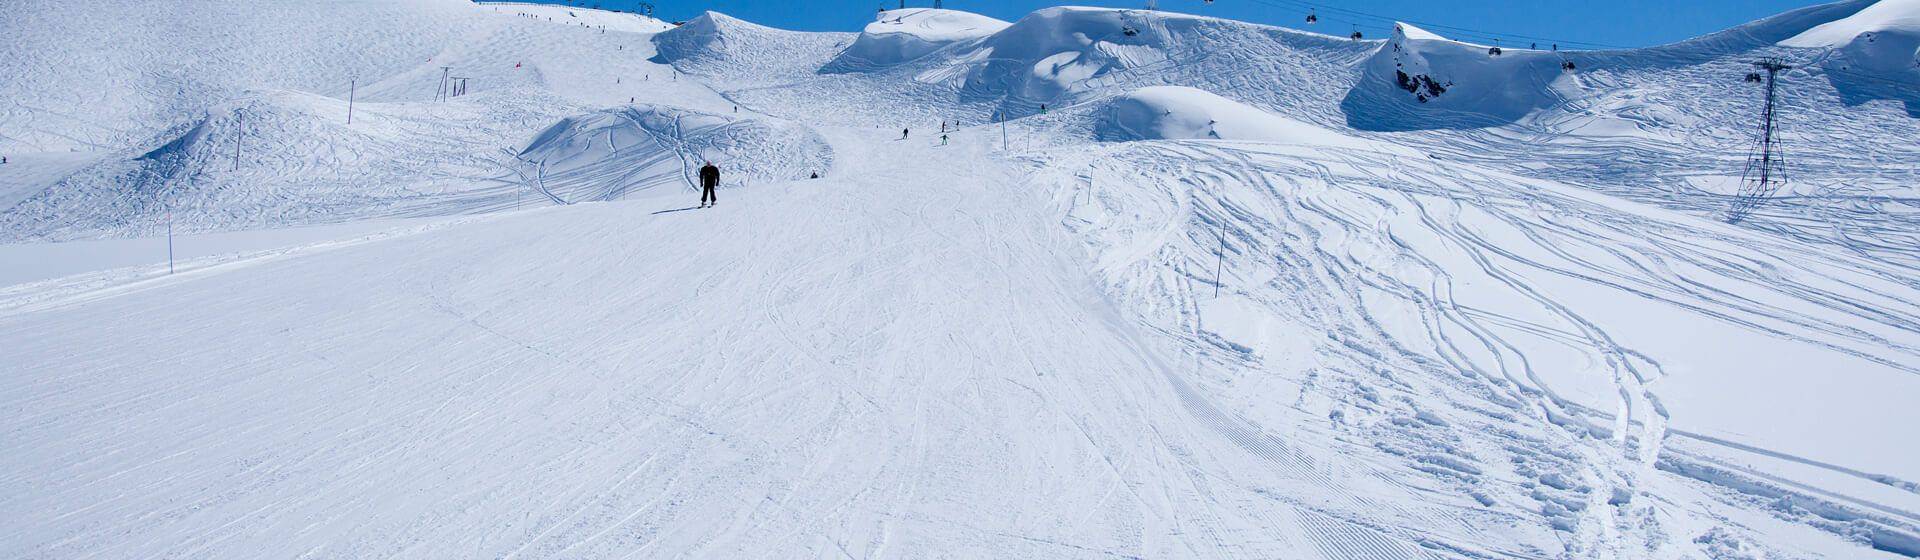 Holidays to Belle Plagne Image